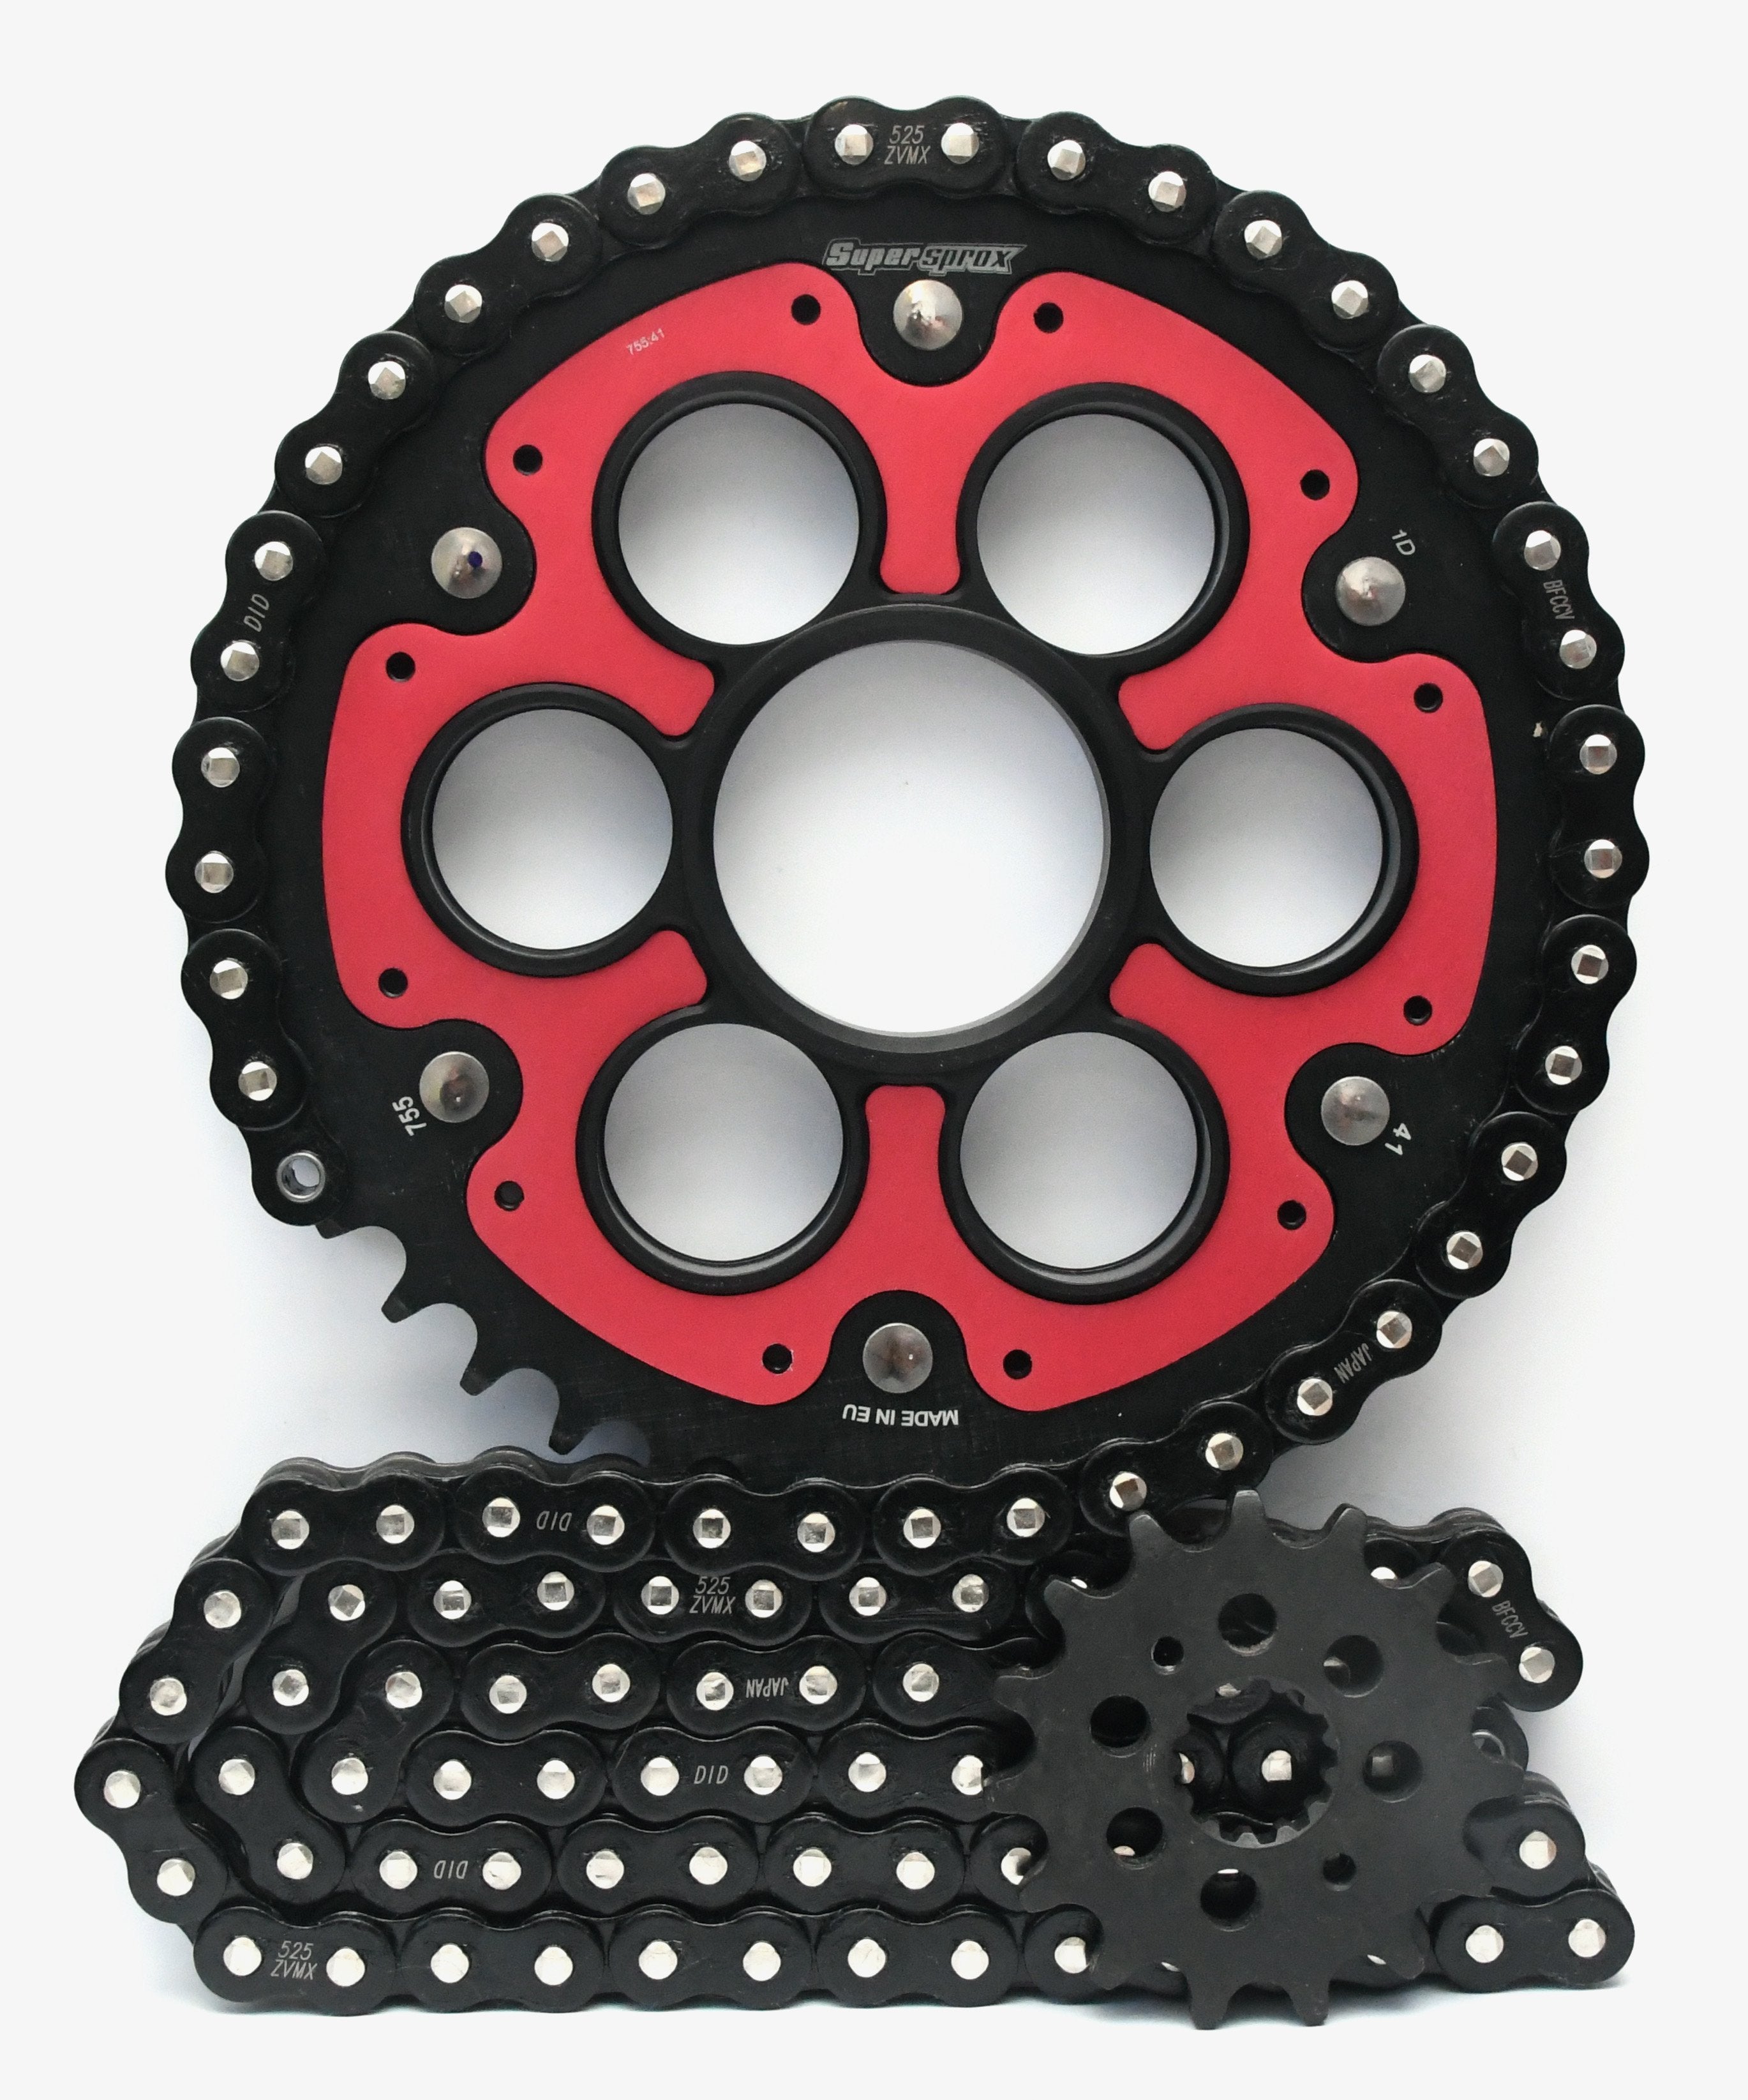 Supersprox Chain & Sprocket Kit for Ducati 1100 Streetfighter 2009-2011 - Standard Gearing